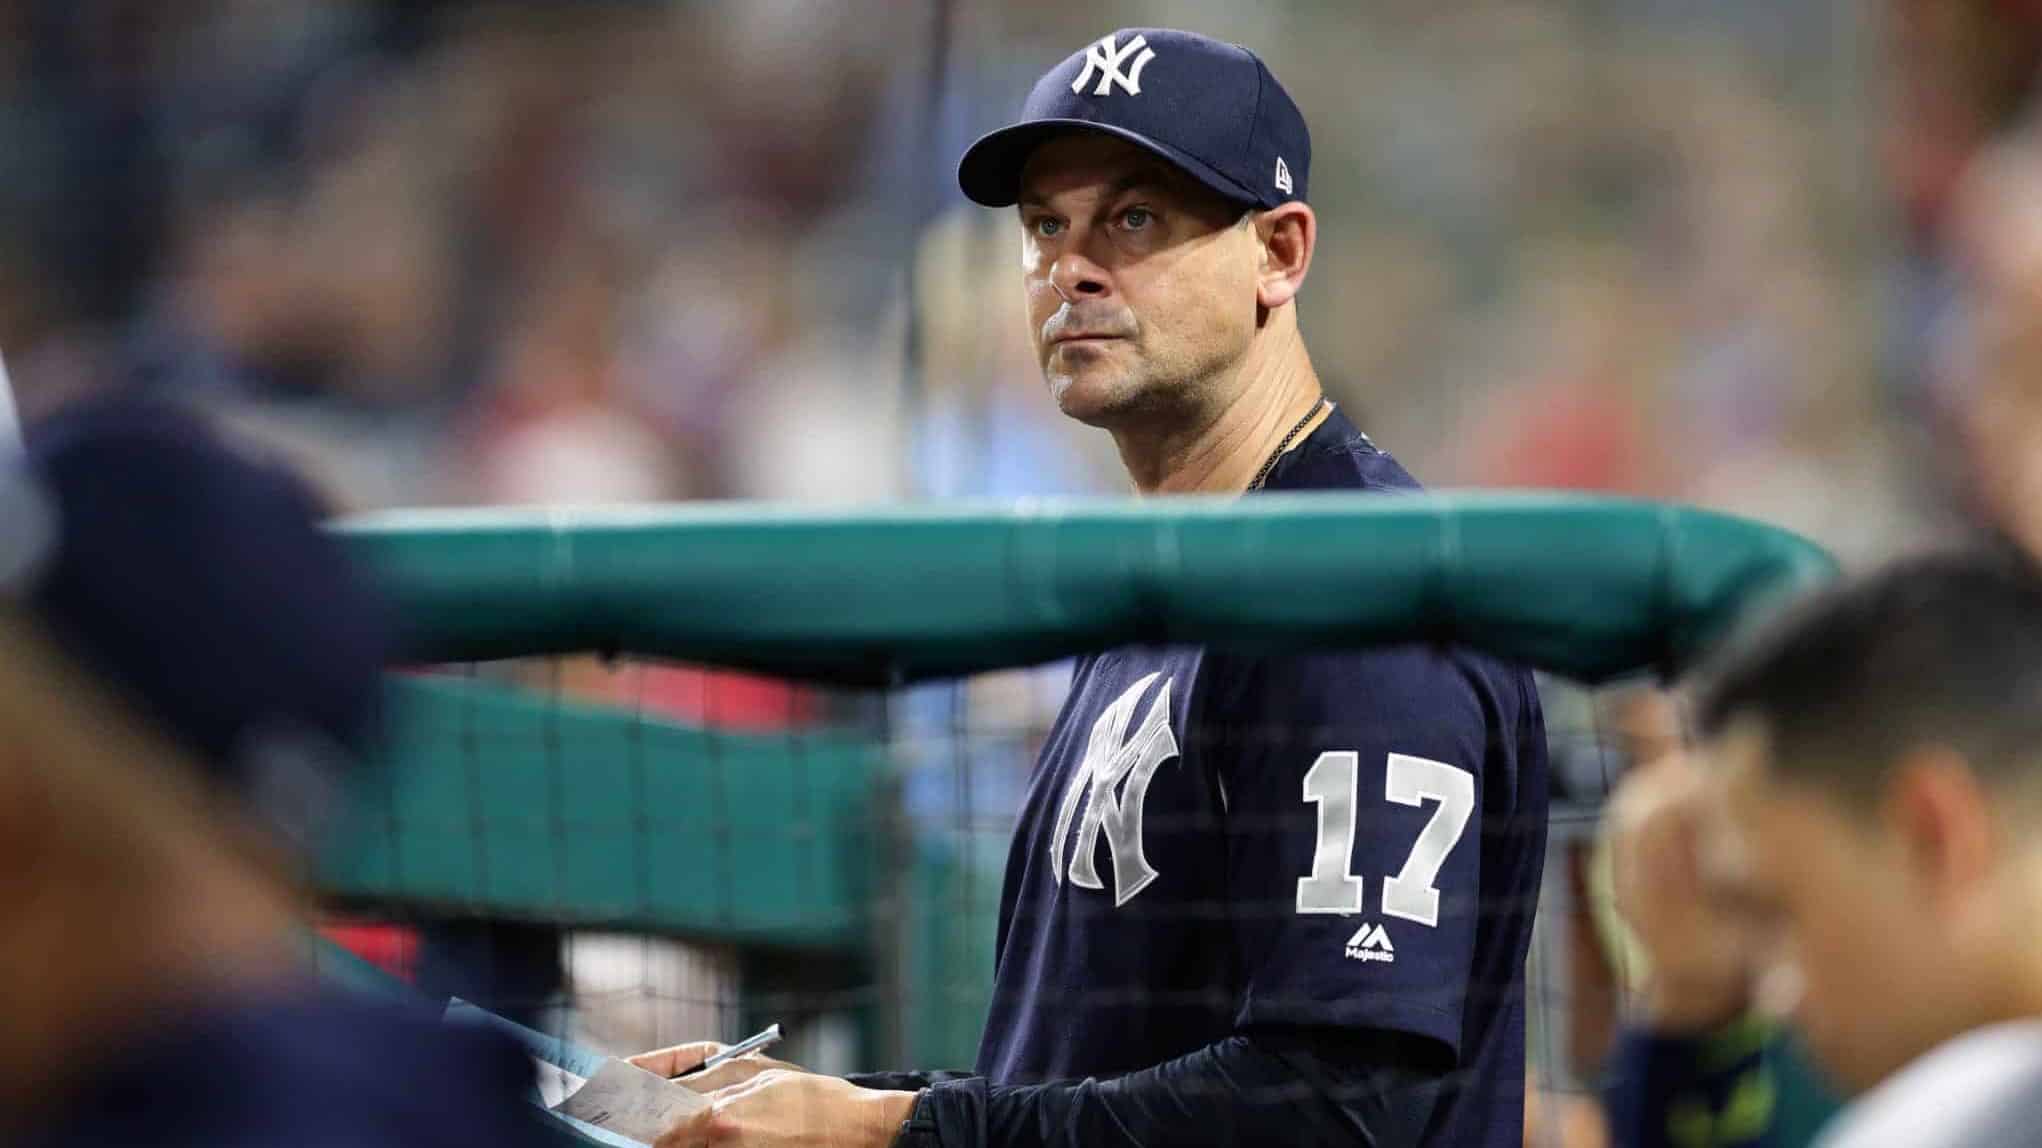 Aaron Boone and the Yankees are running out of time to put it all together